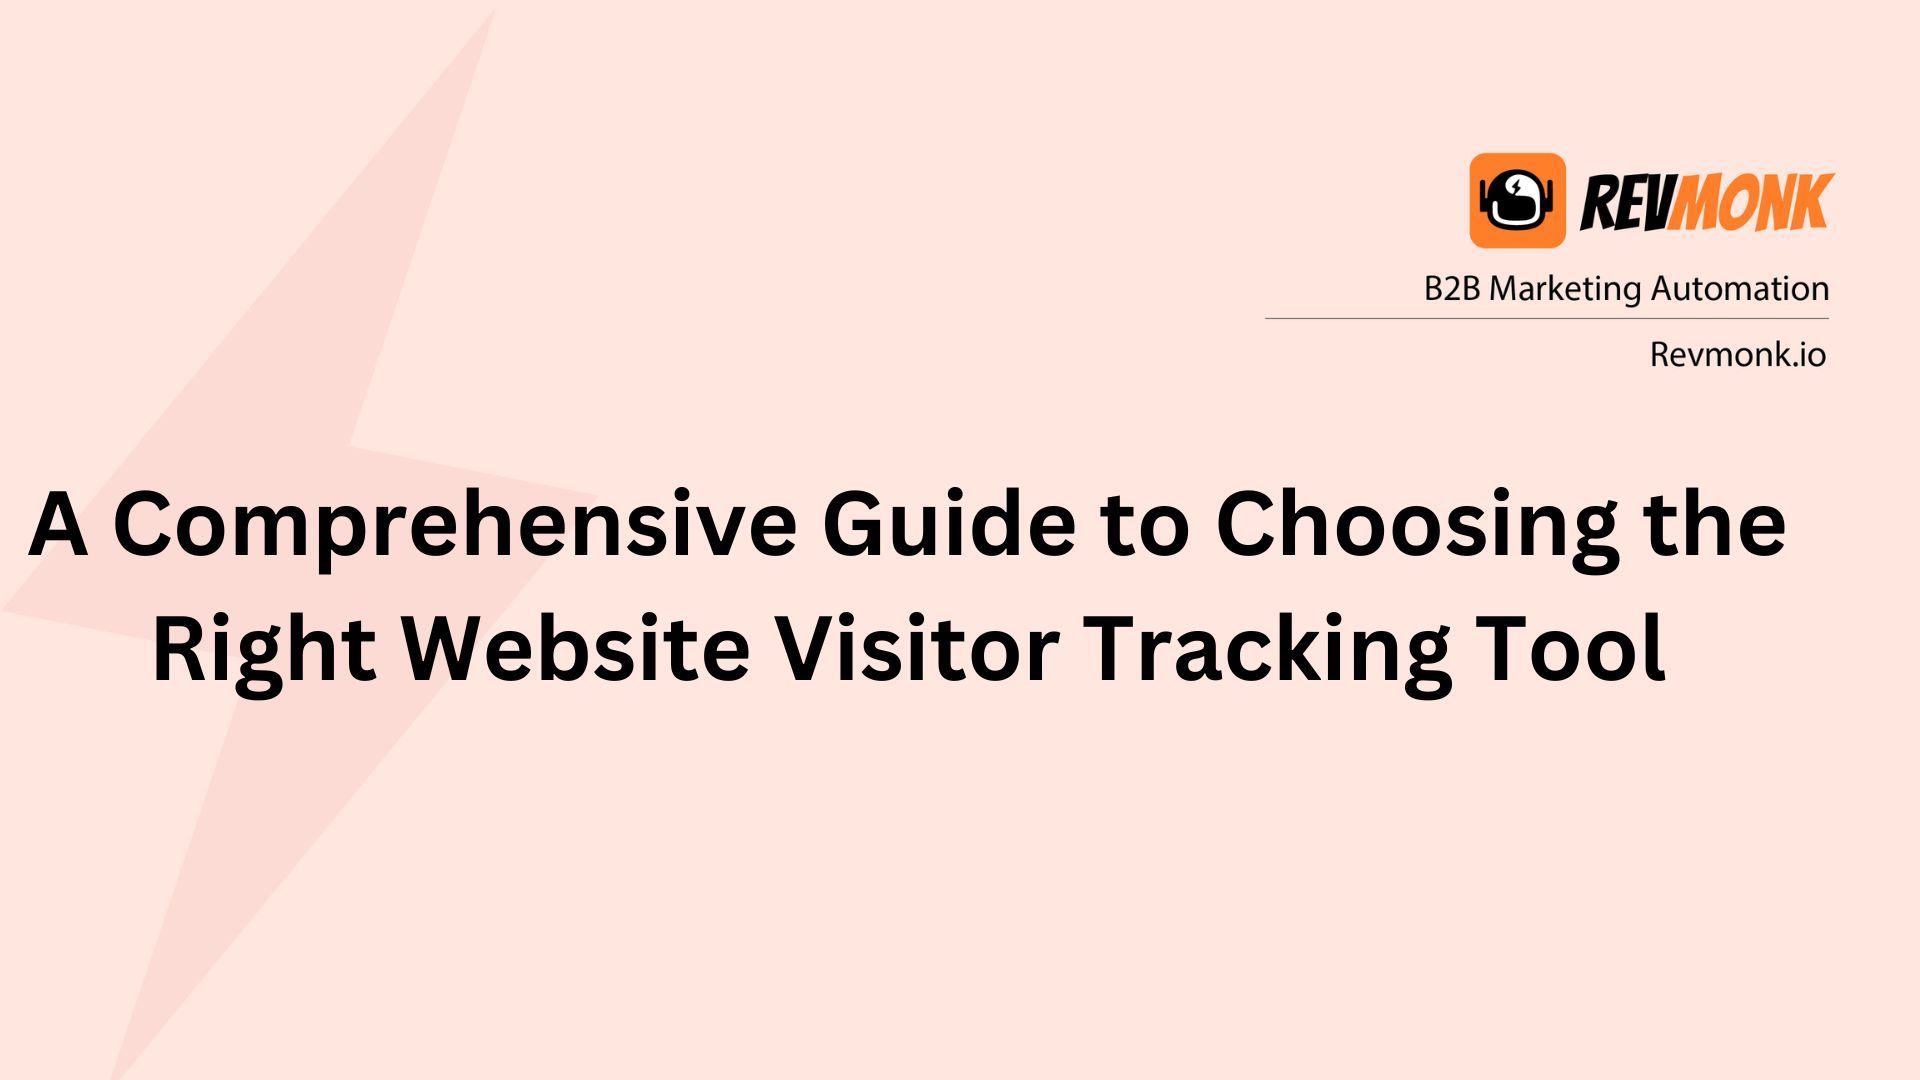 A Comprehensive Guide to Choosing the Right Website Visitor Tracking Tool